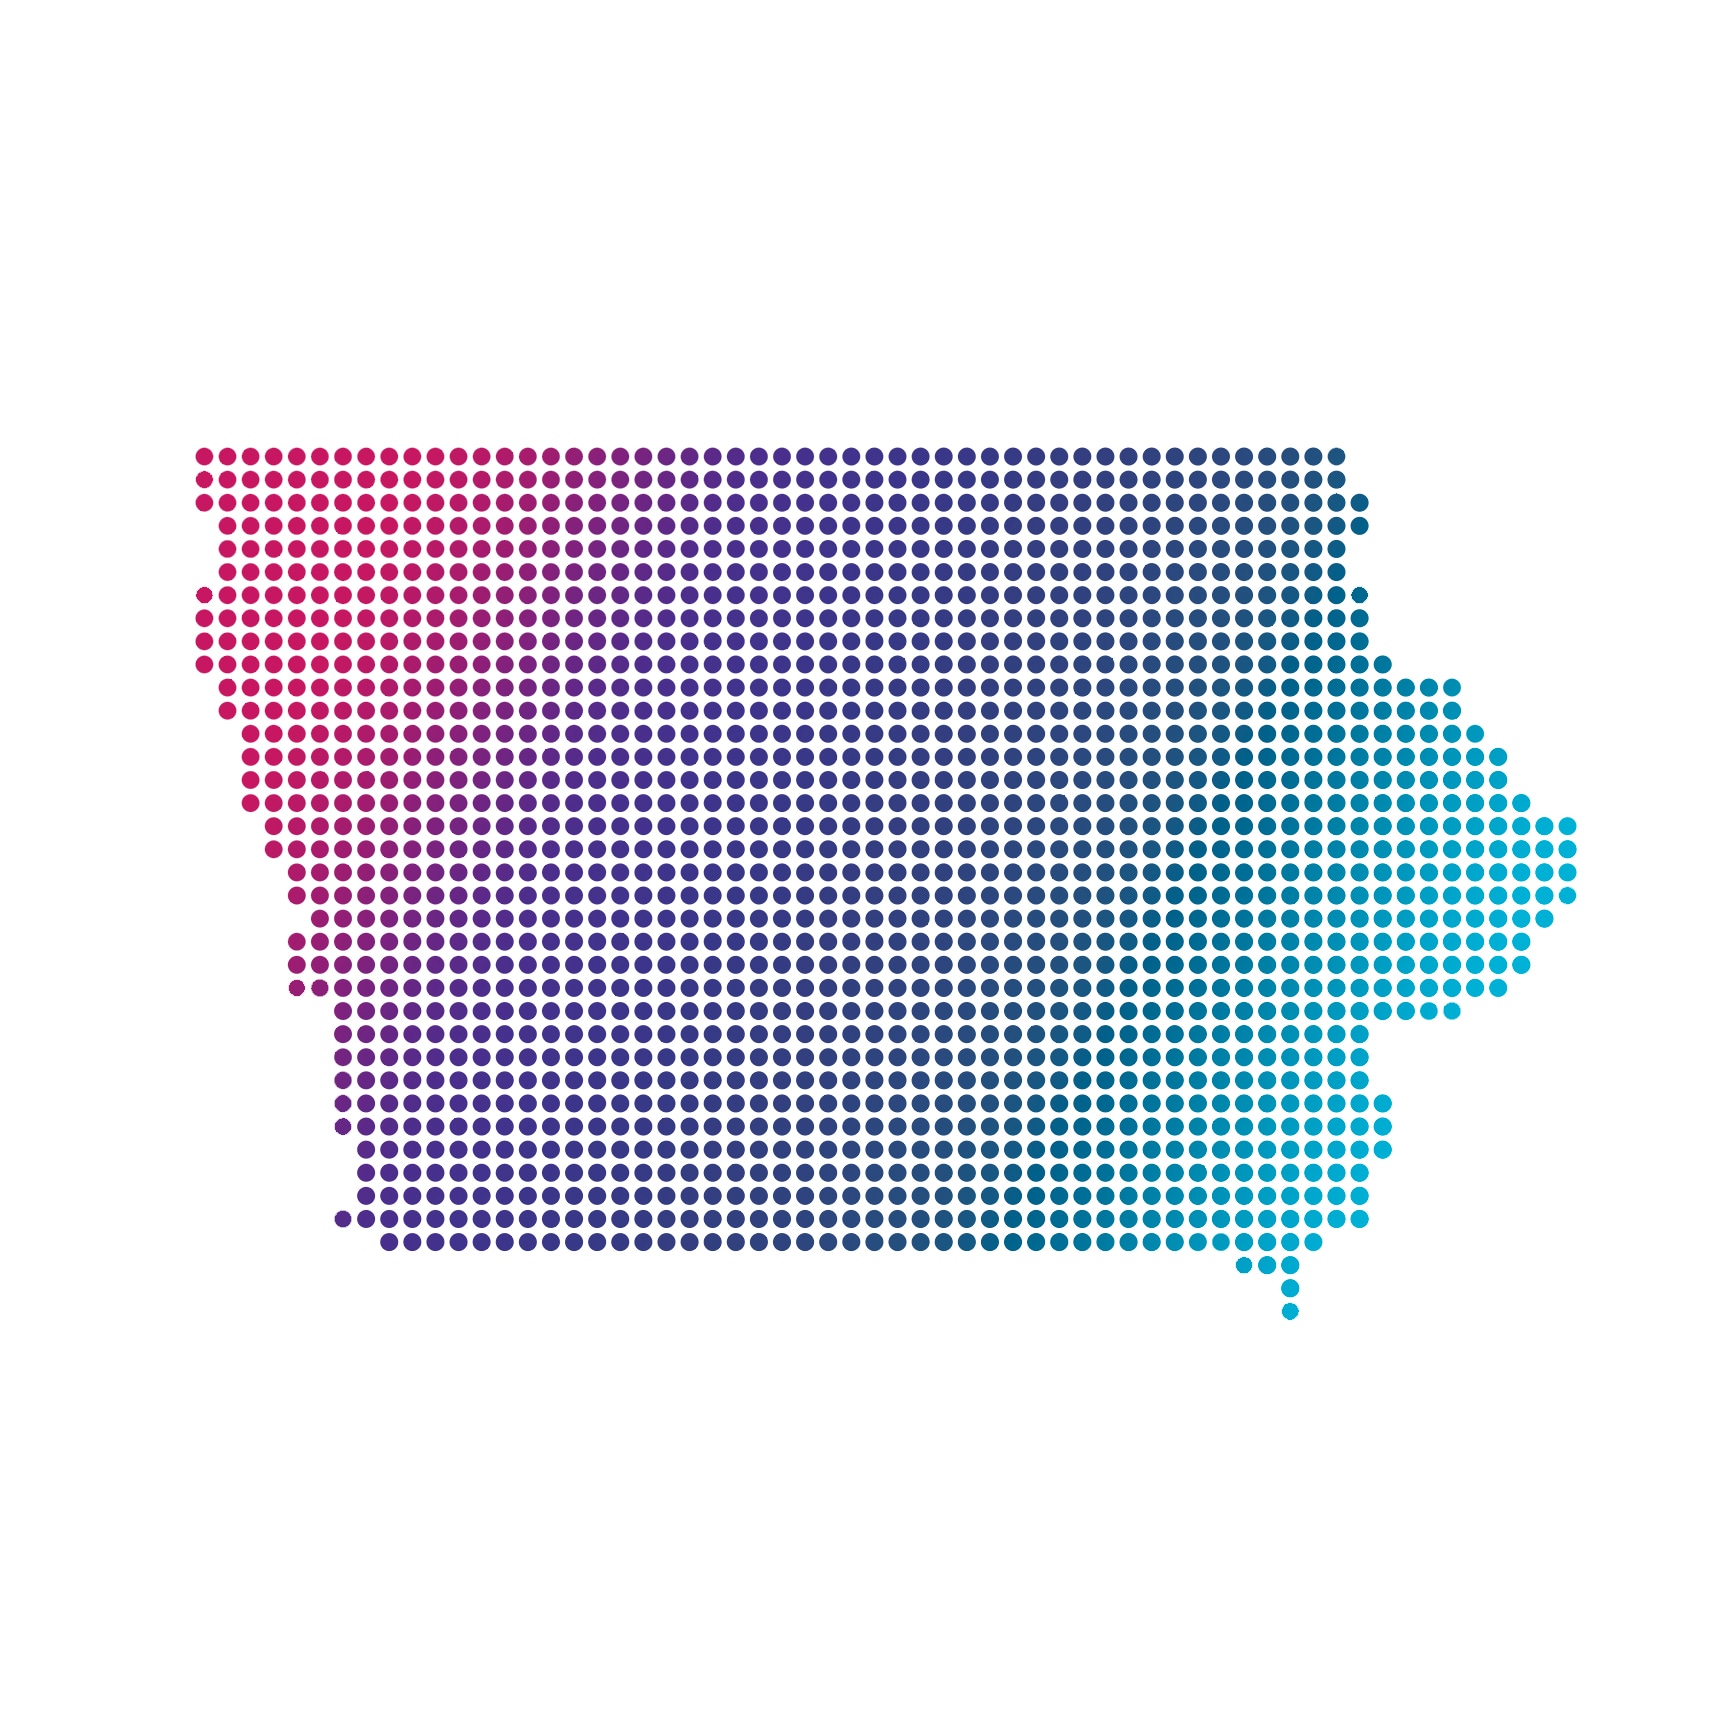 Iowa map of blue dots on white background